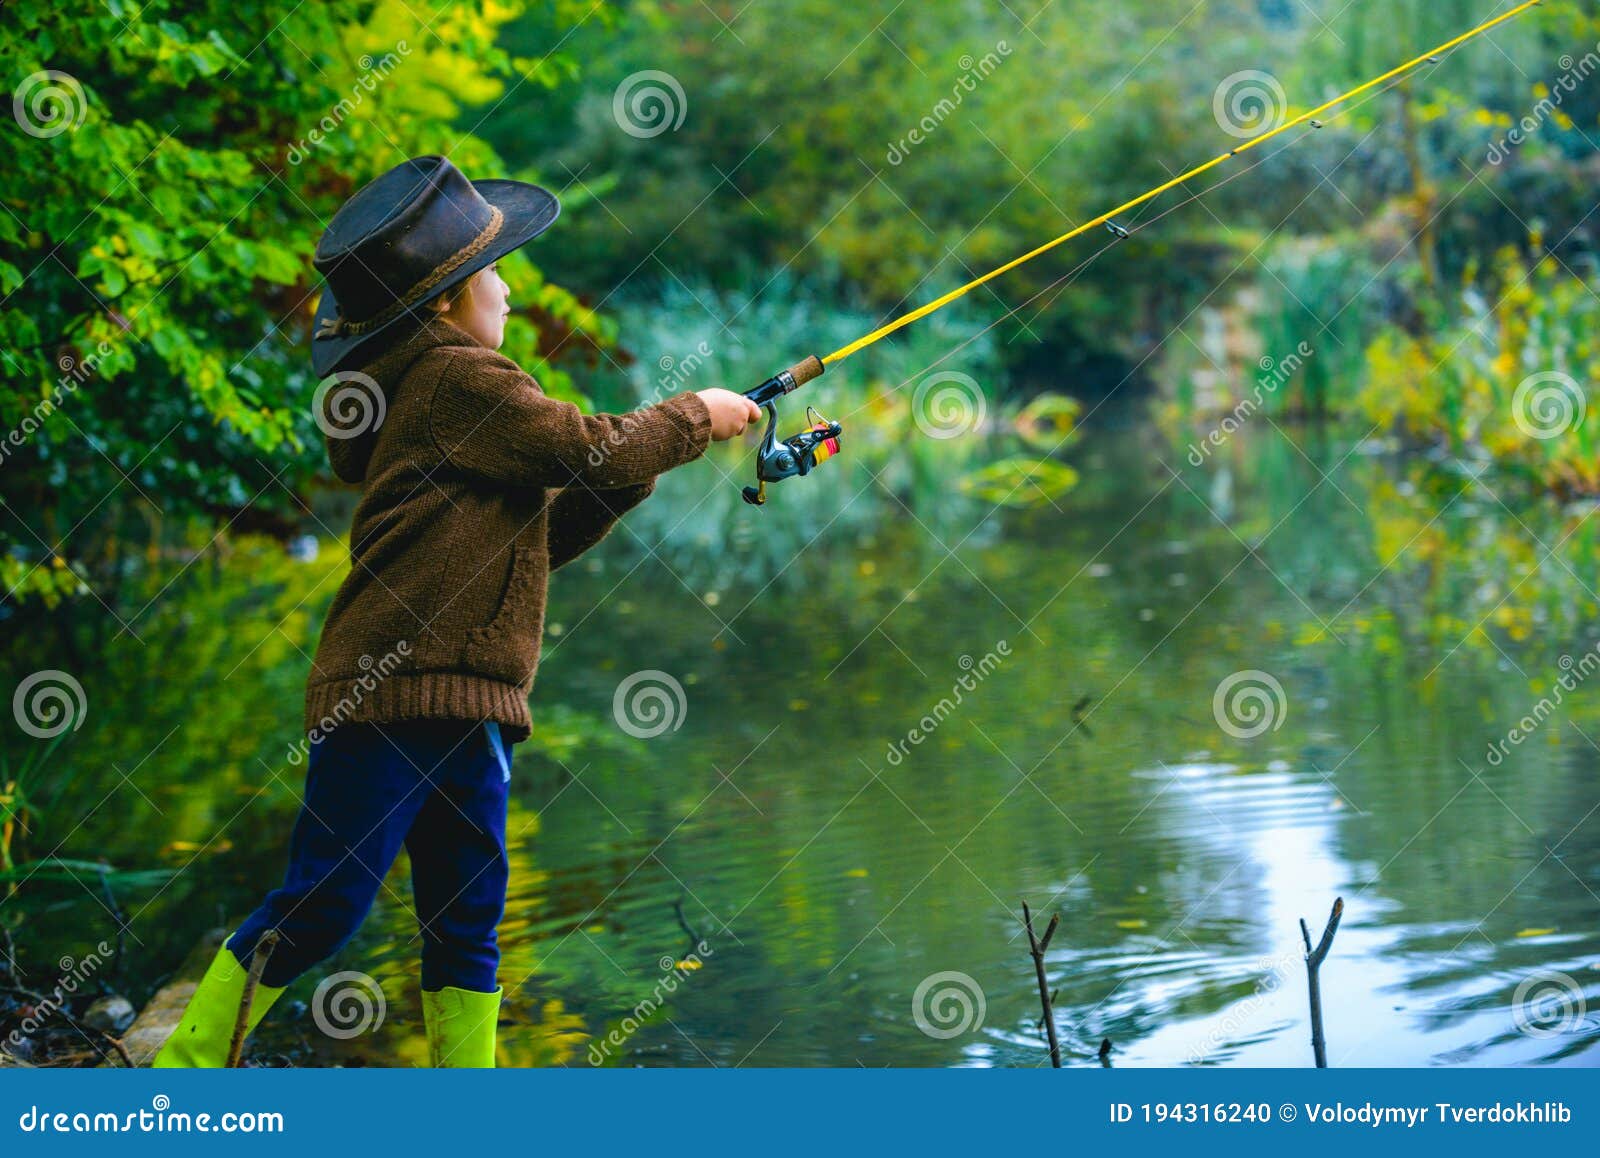 Little Boy Child Catching a Fish. Kid with Fishing Rod at Lake